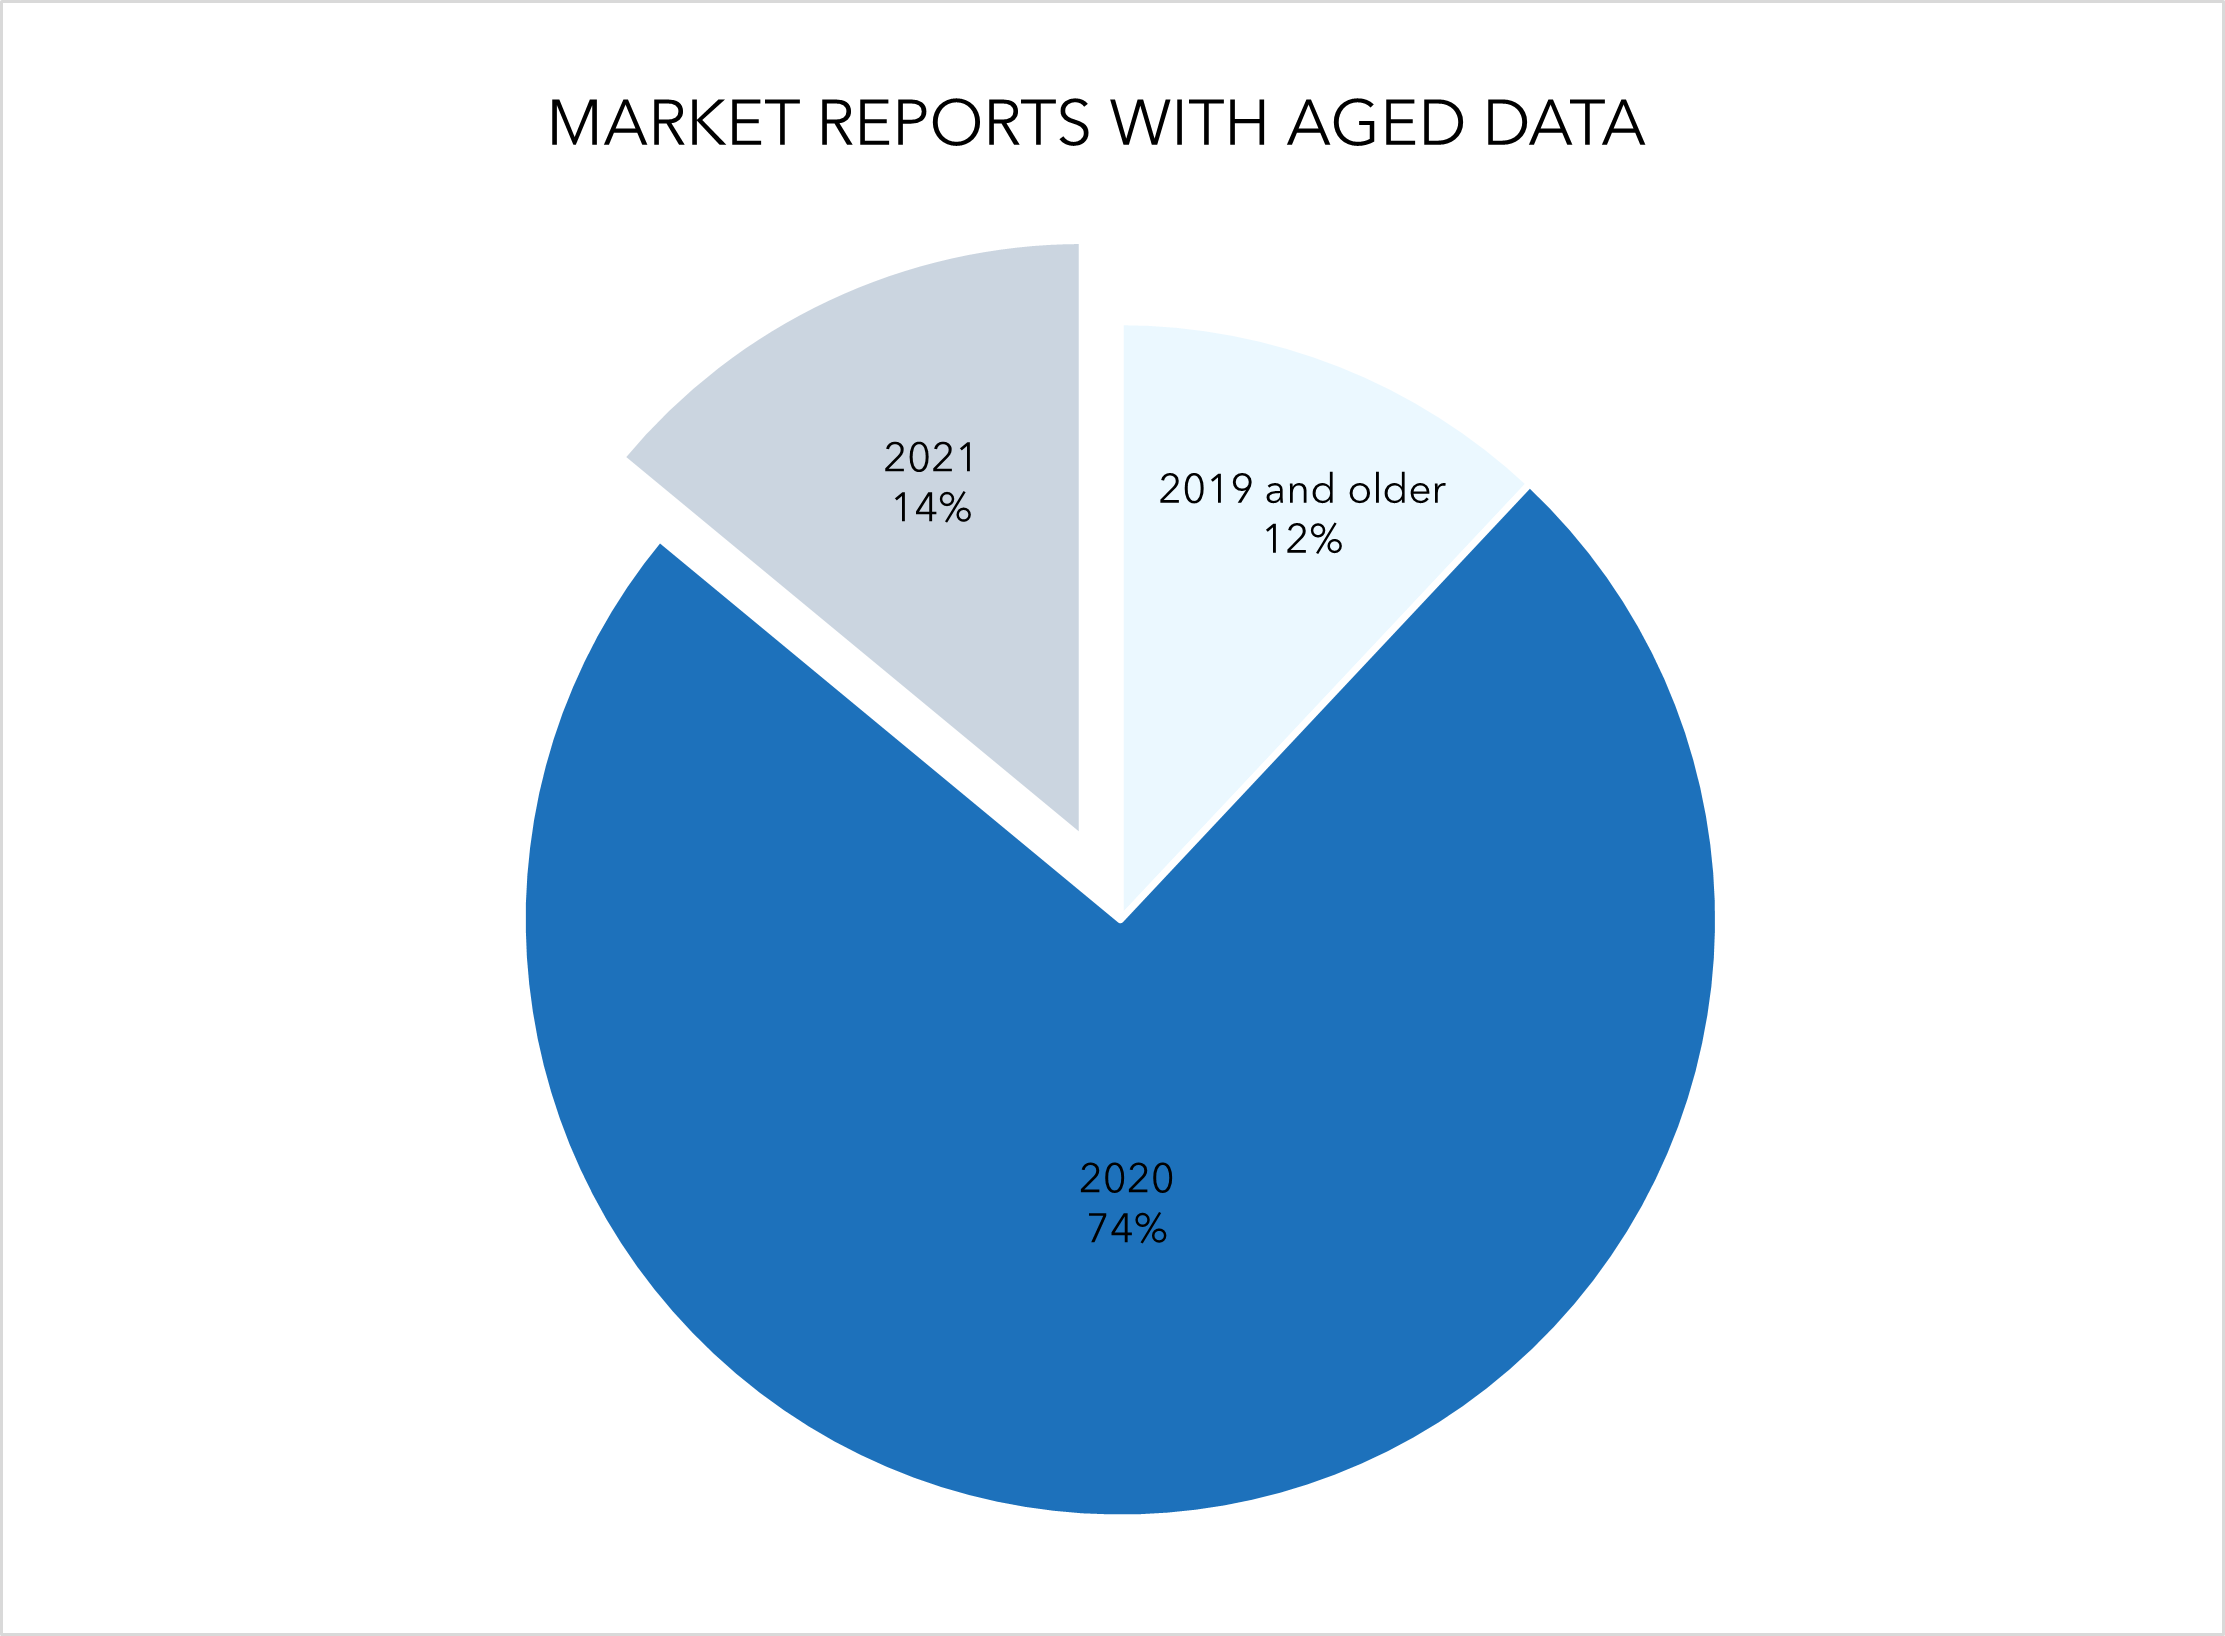 Pie chart of market reports with aged data